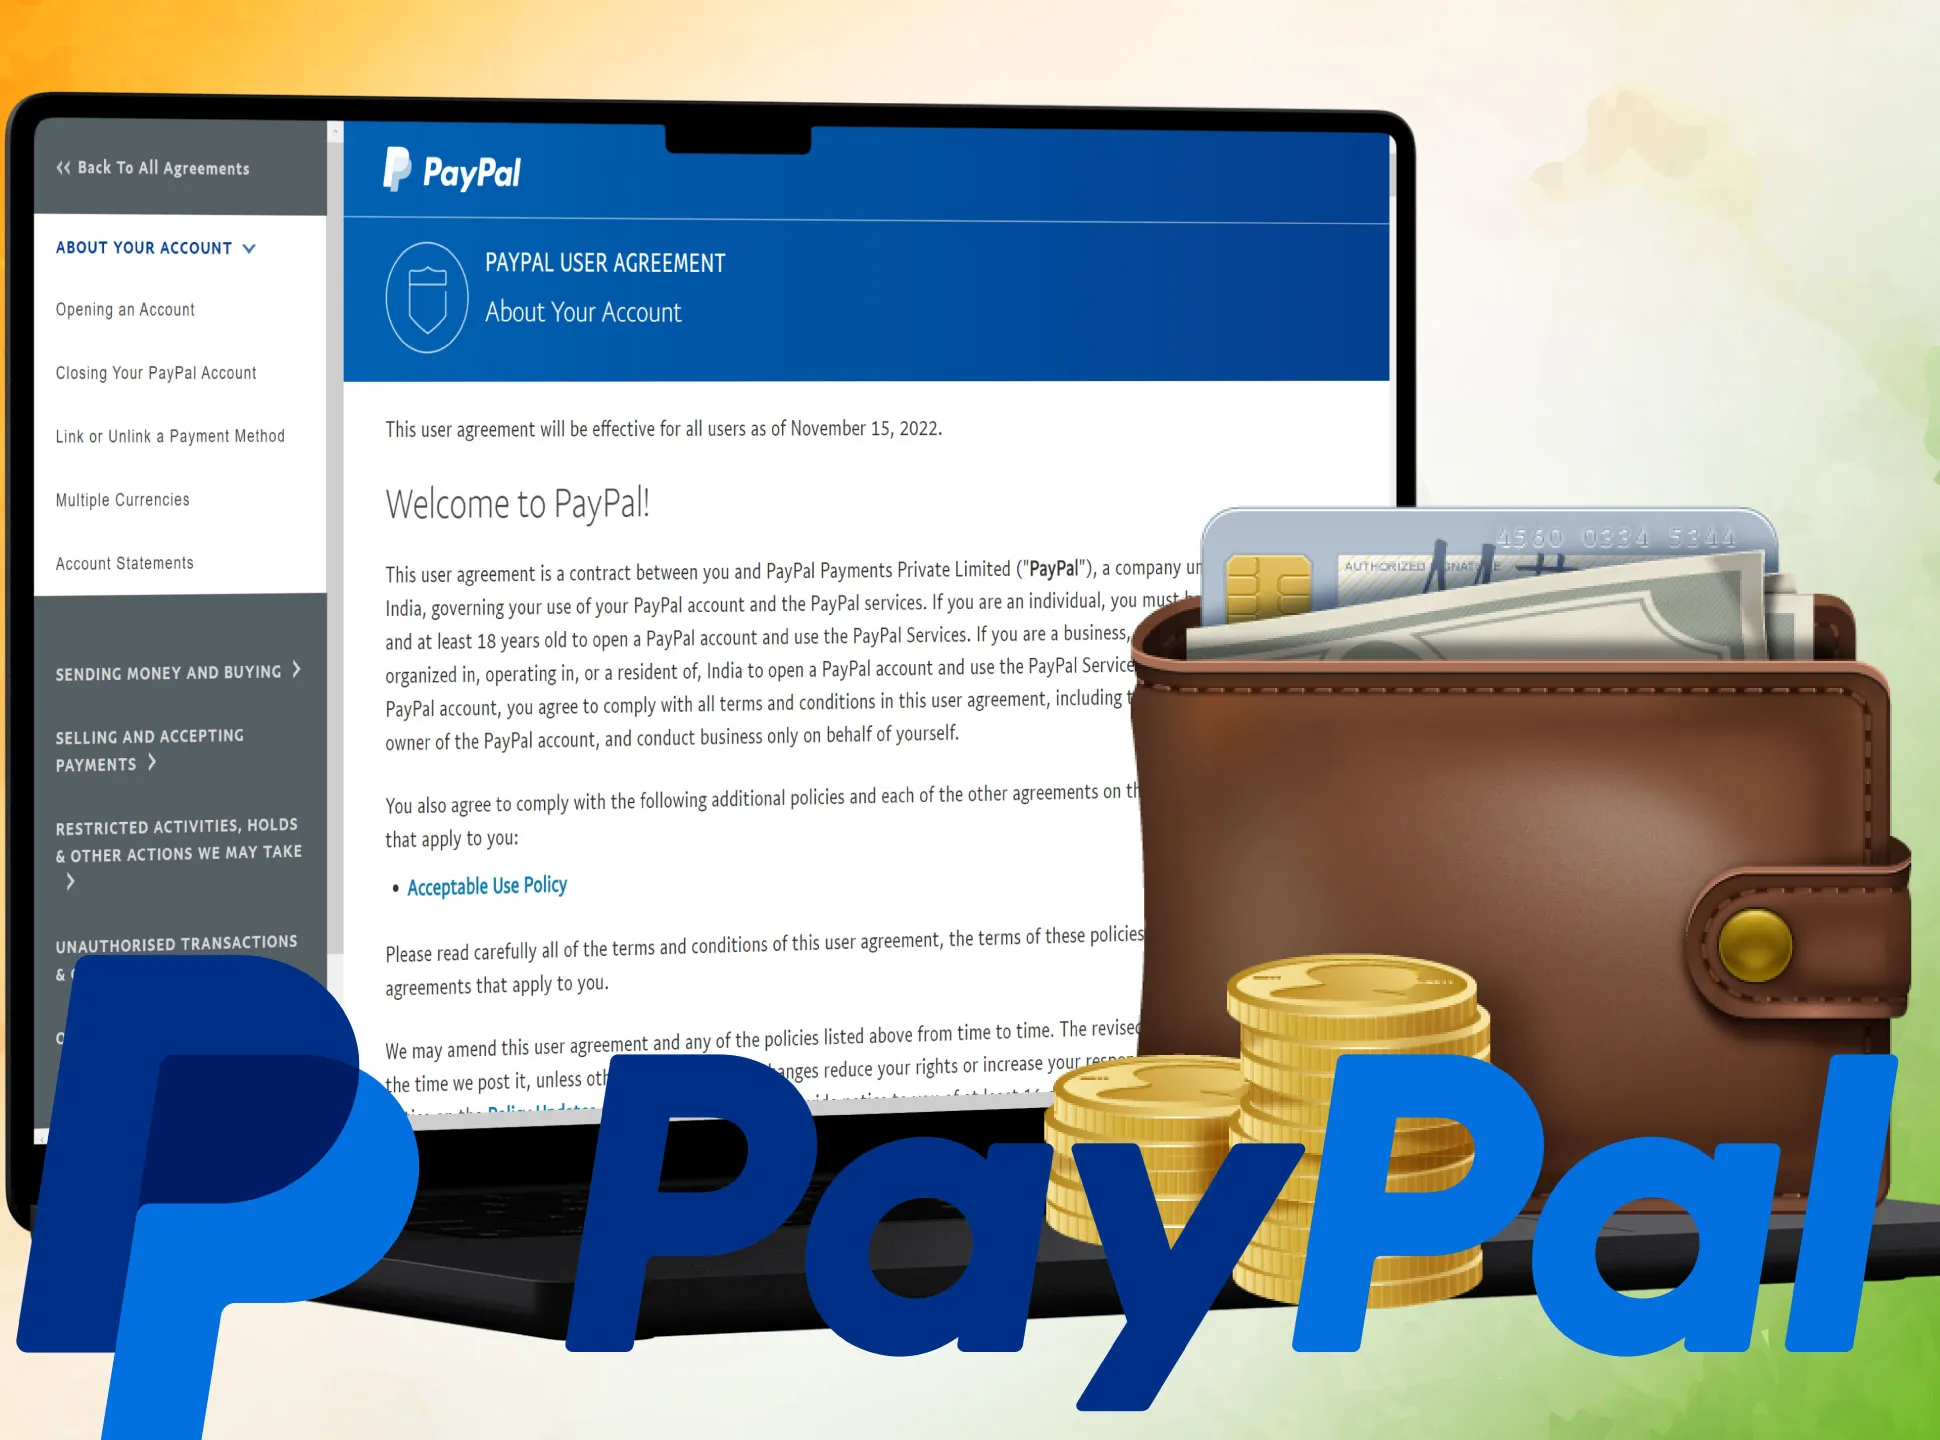 You should create your PayPal account to use the wallet later.